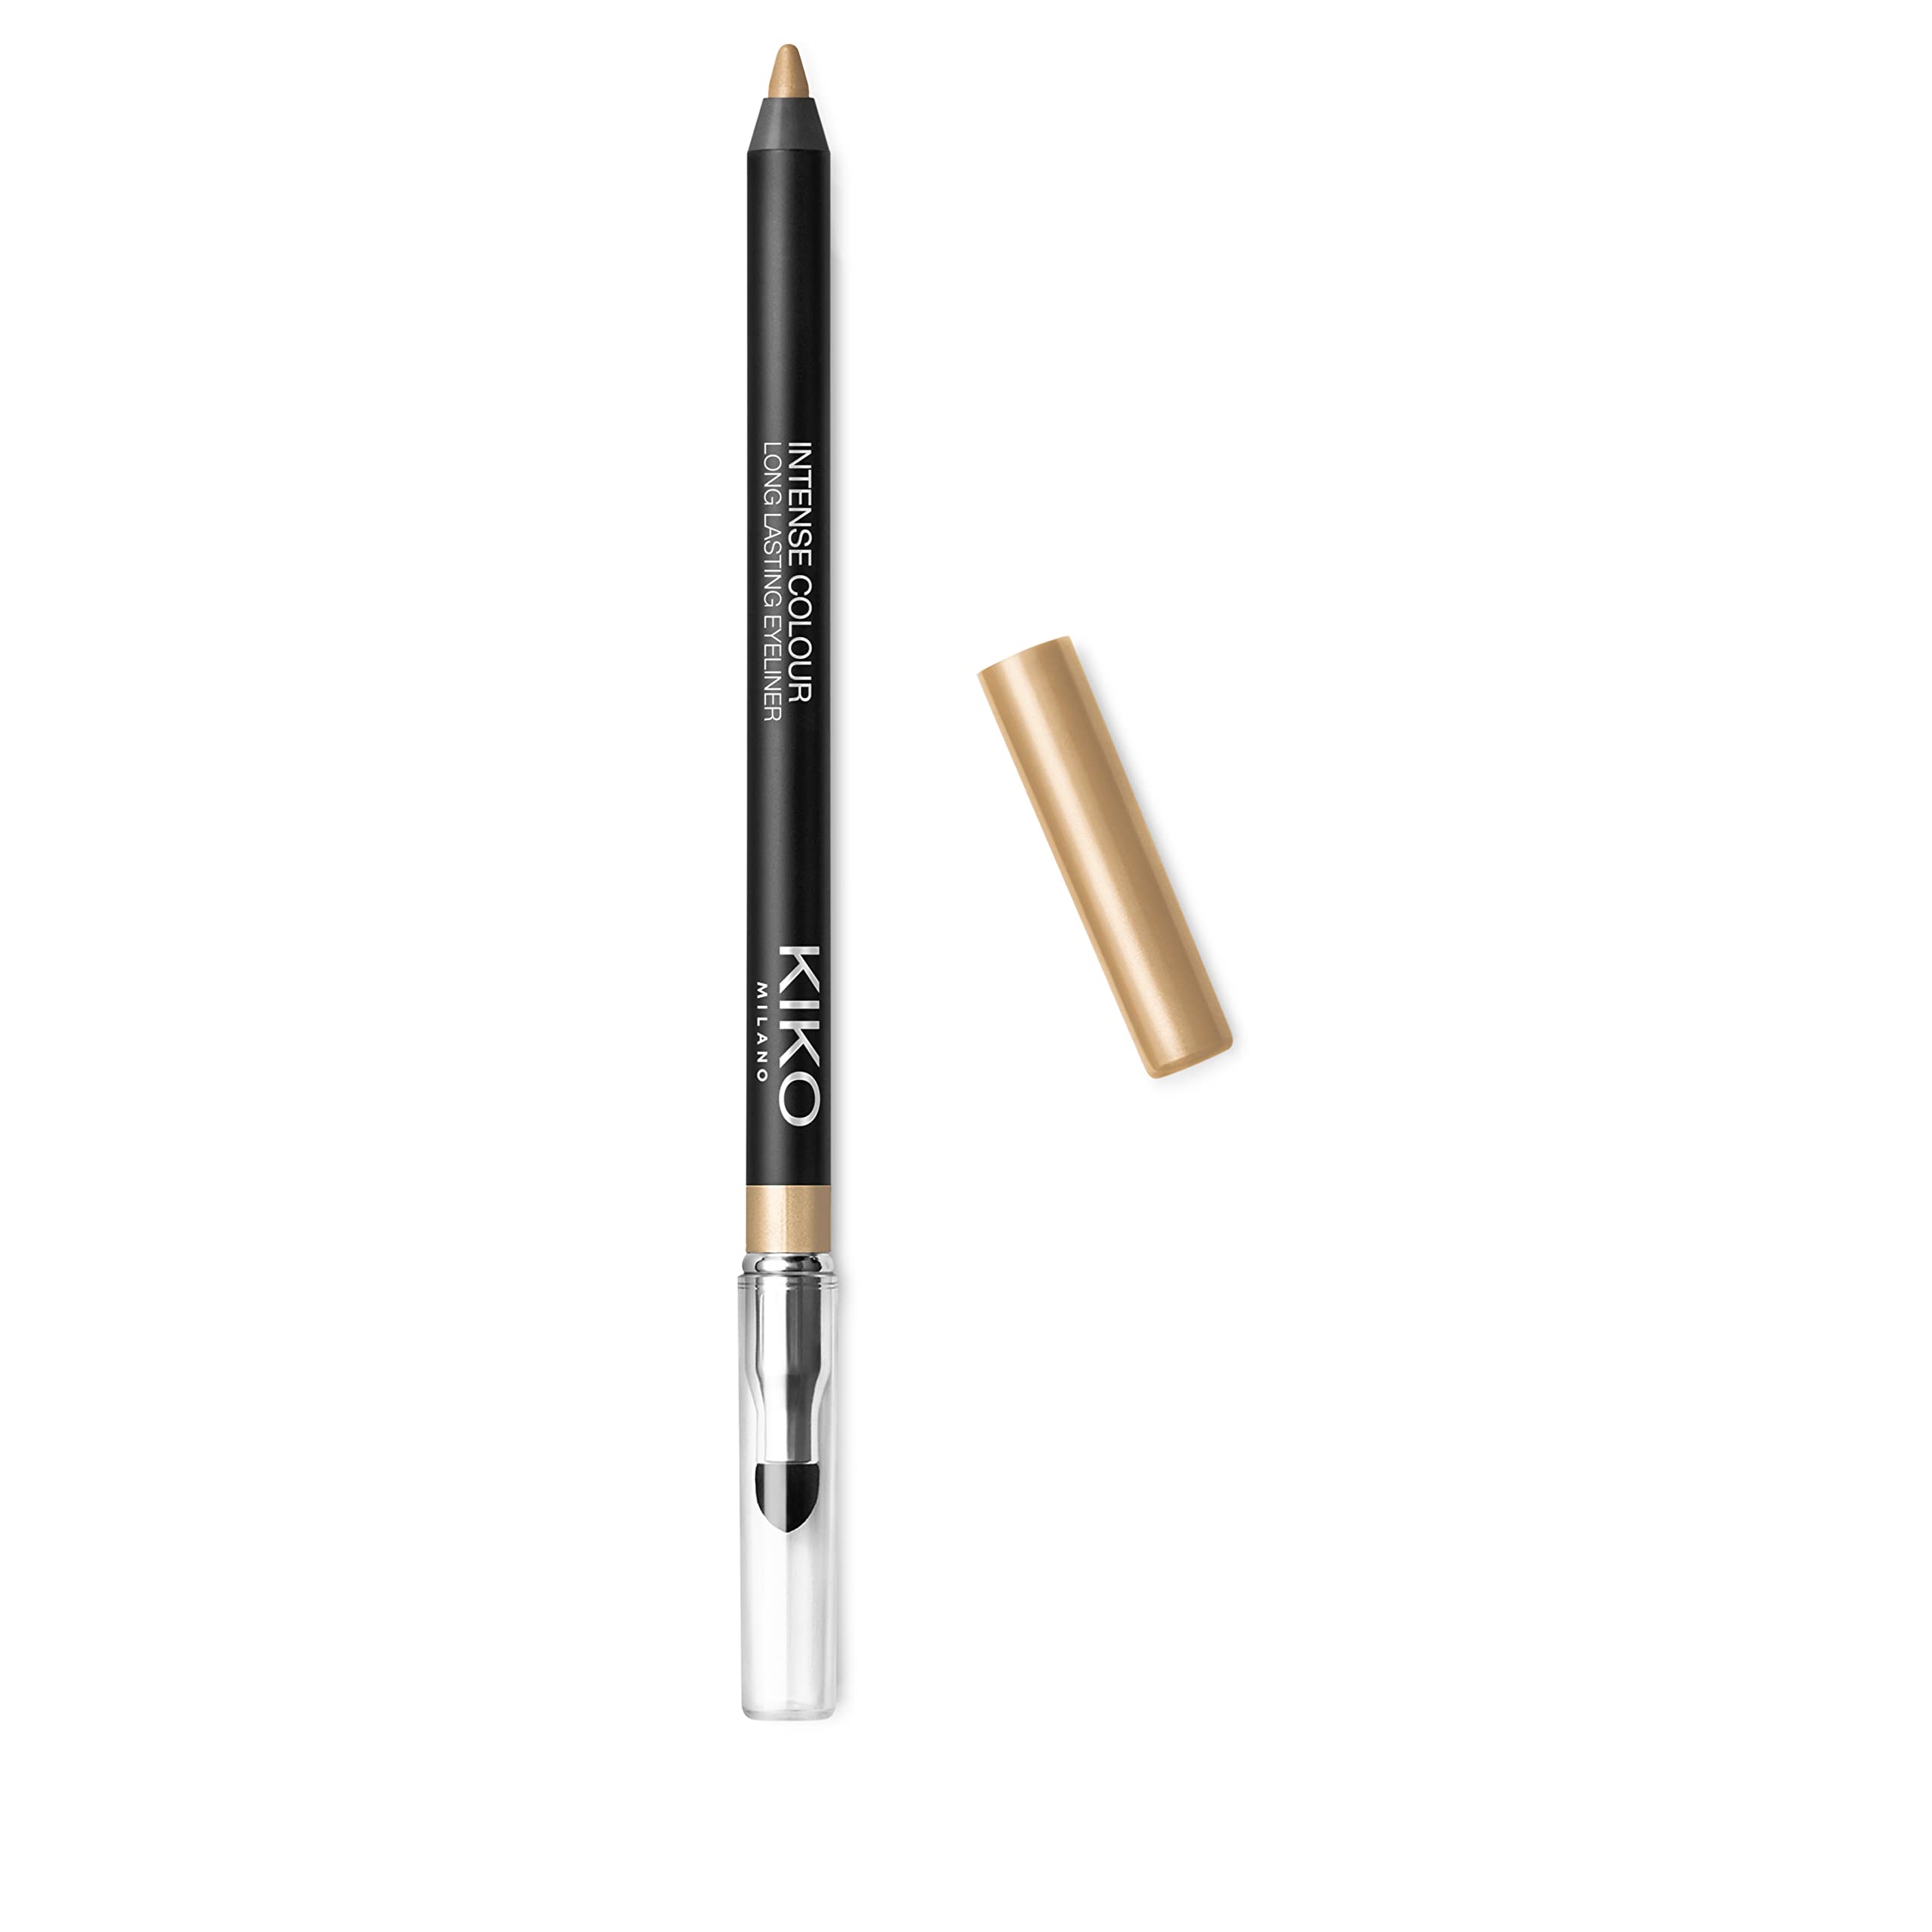 Kiko Milano Intense colour Long Lasting Eyeliner 17  Intense And Smooth-gliding Outer Eye Pencil With Long Wear